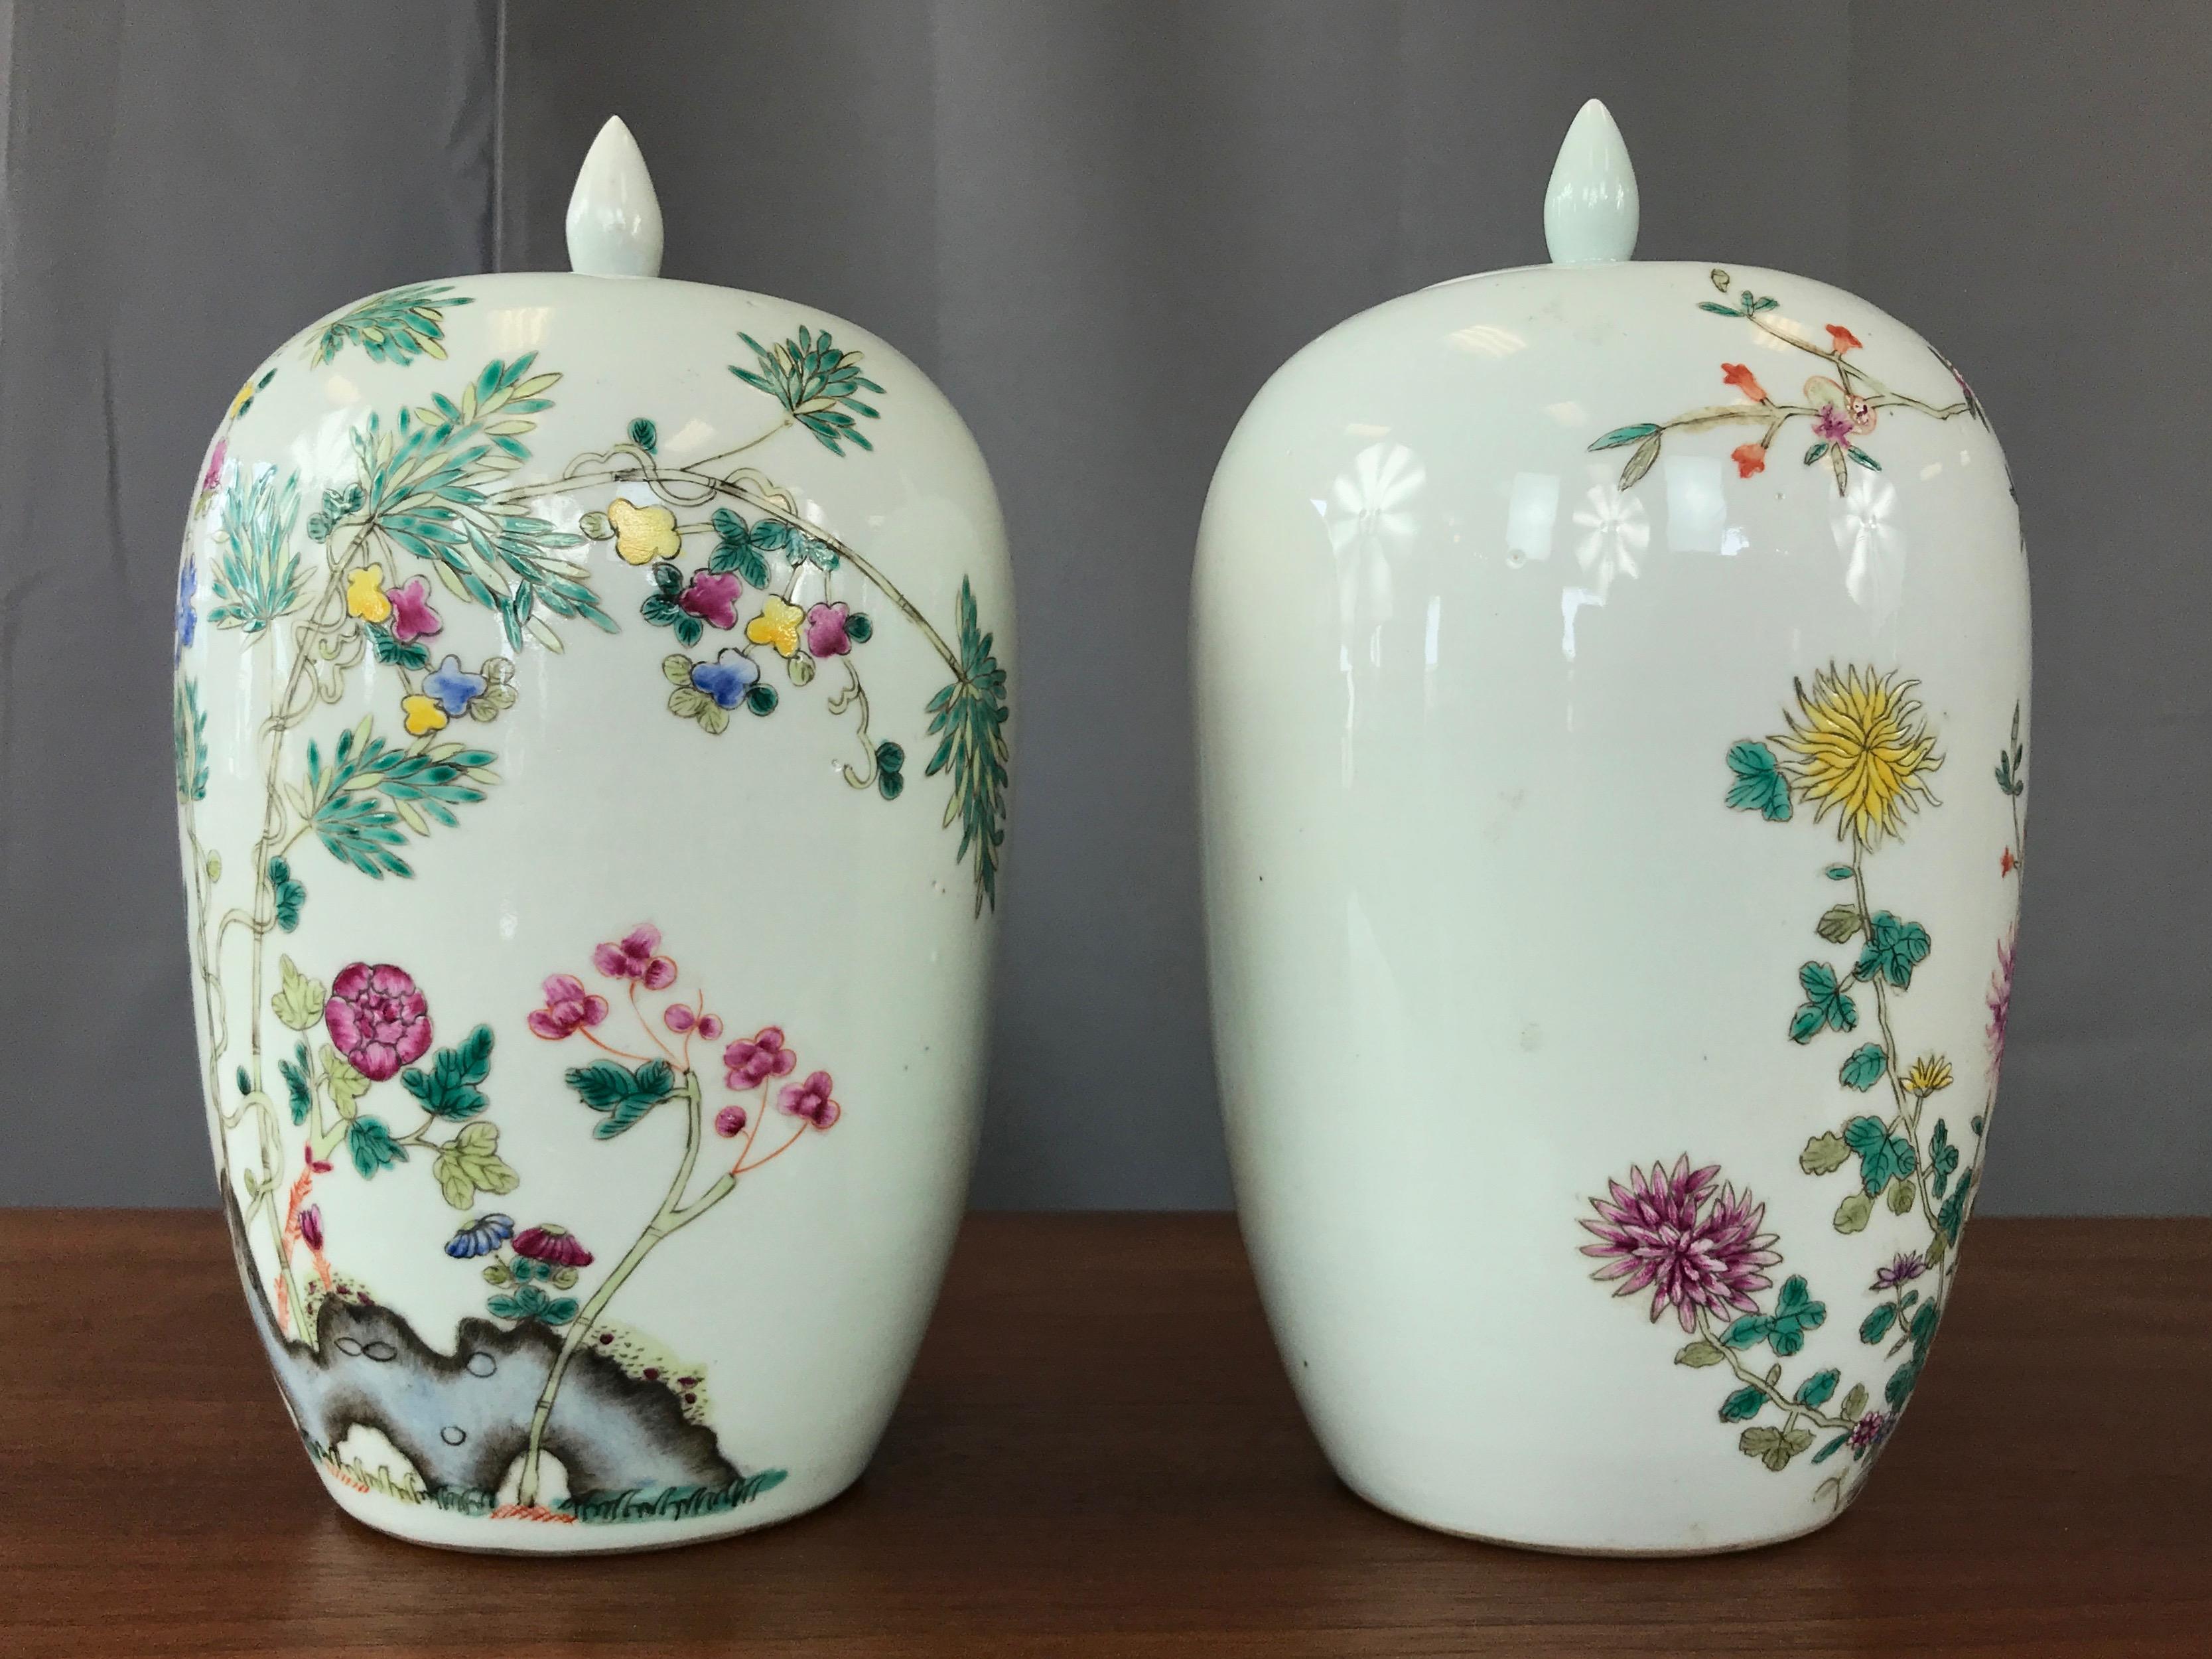 Chinoiserie Pair of Fine Chinese Famille Rose Porcelain Covered Vases, Guangxu Period 